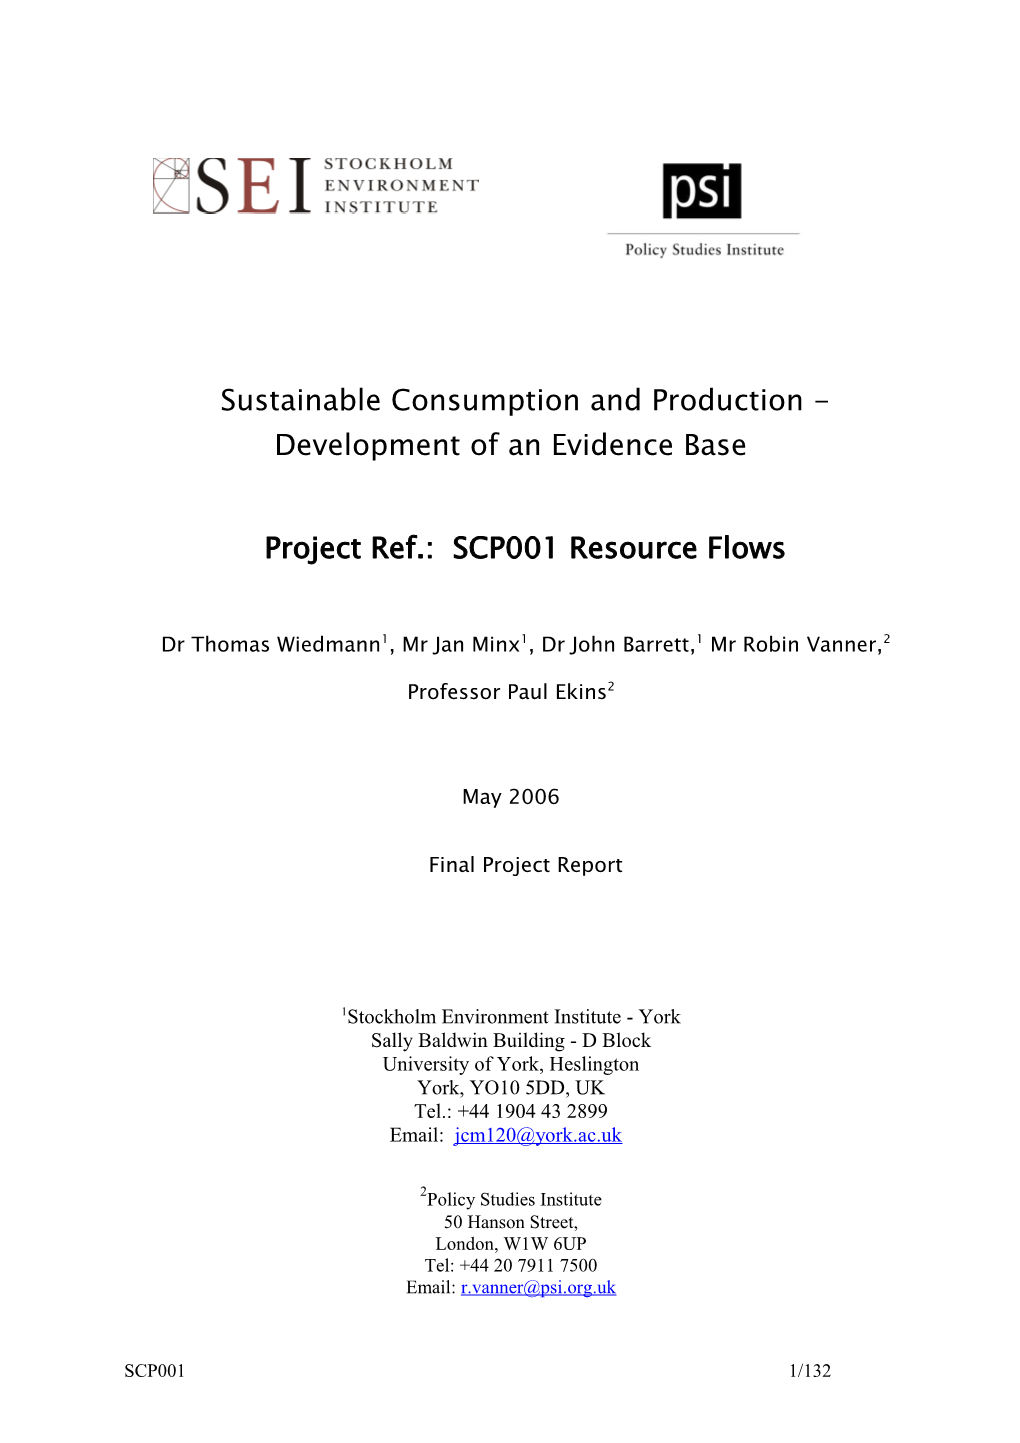 Sustainable Consumption and Production - Development of an Evidence Base